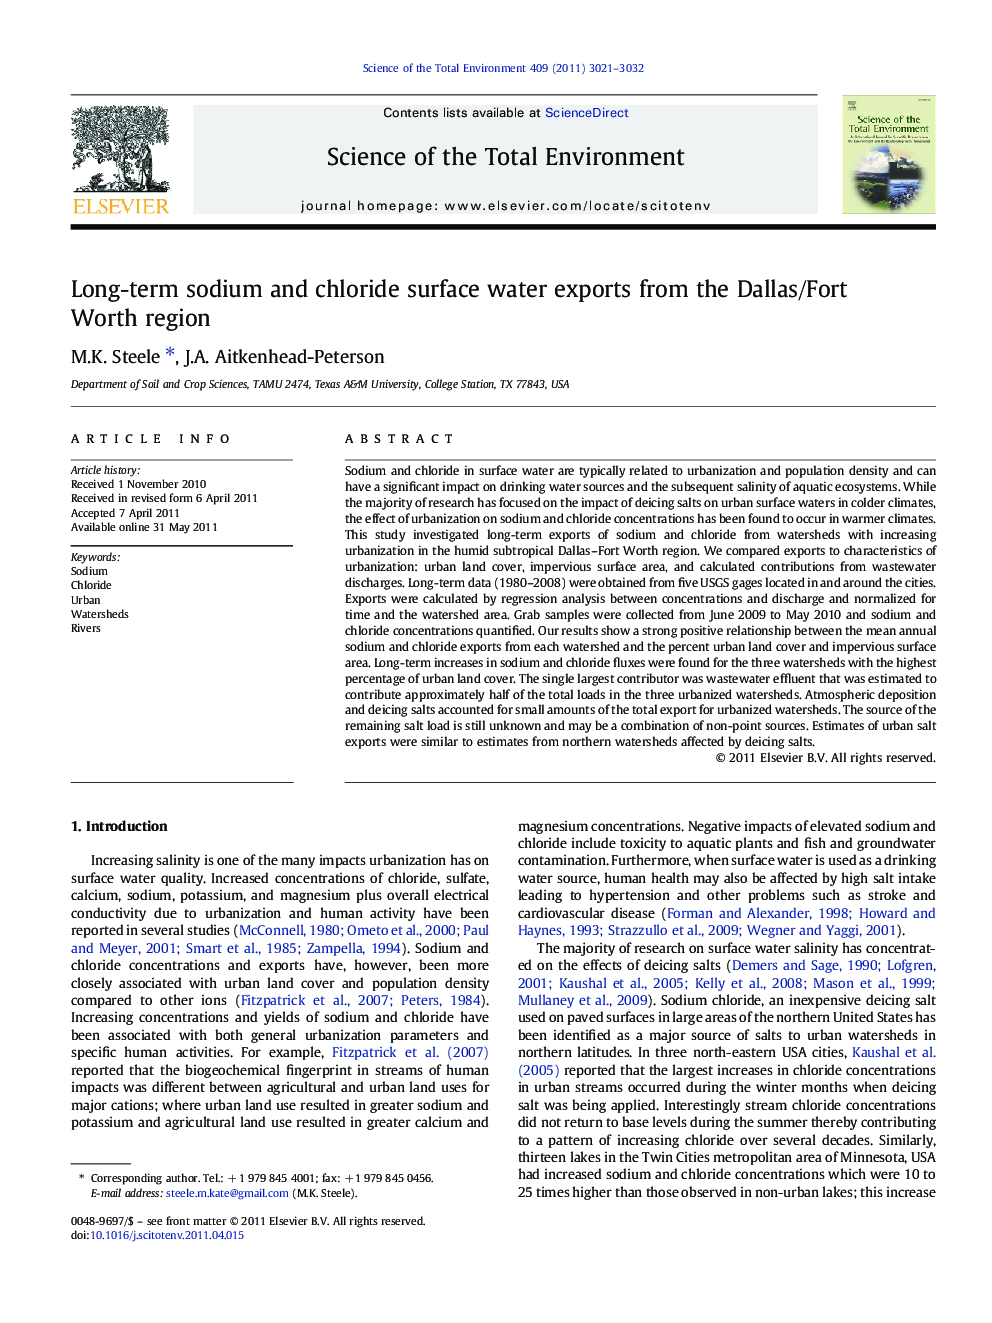 Long-term sodium and chloride surface water exports from the Dallas/Fort Worth region